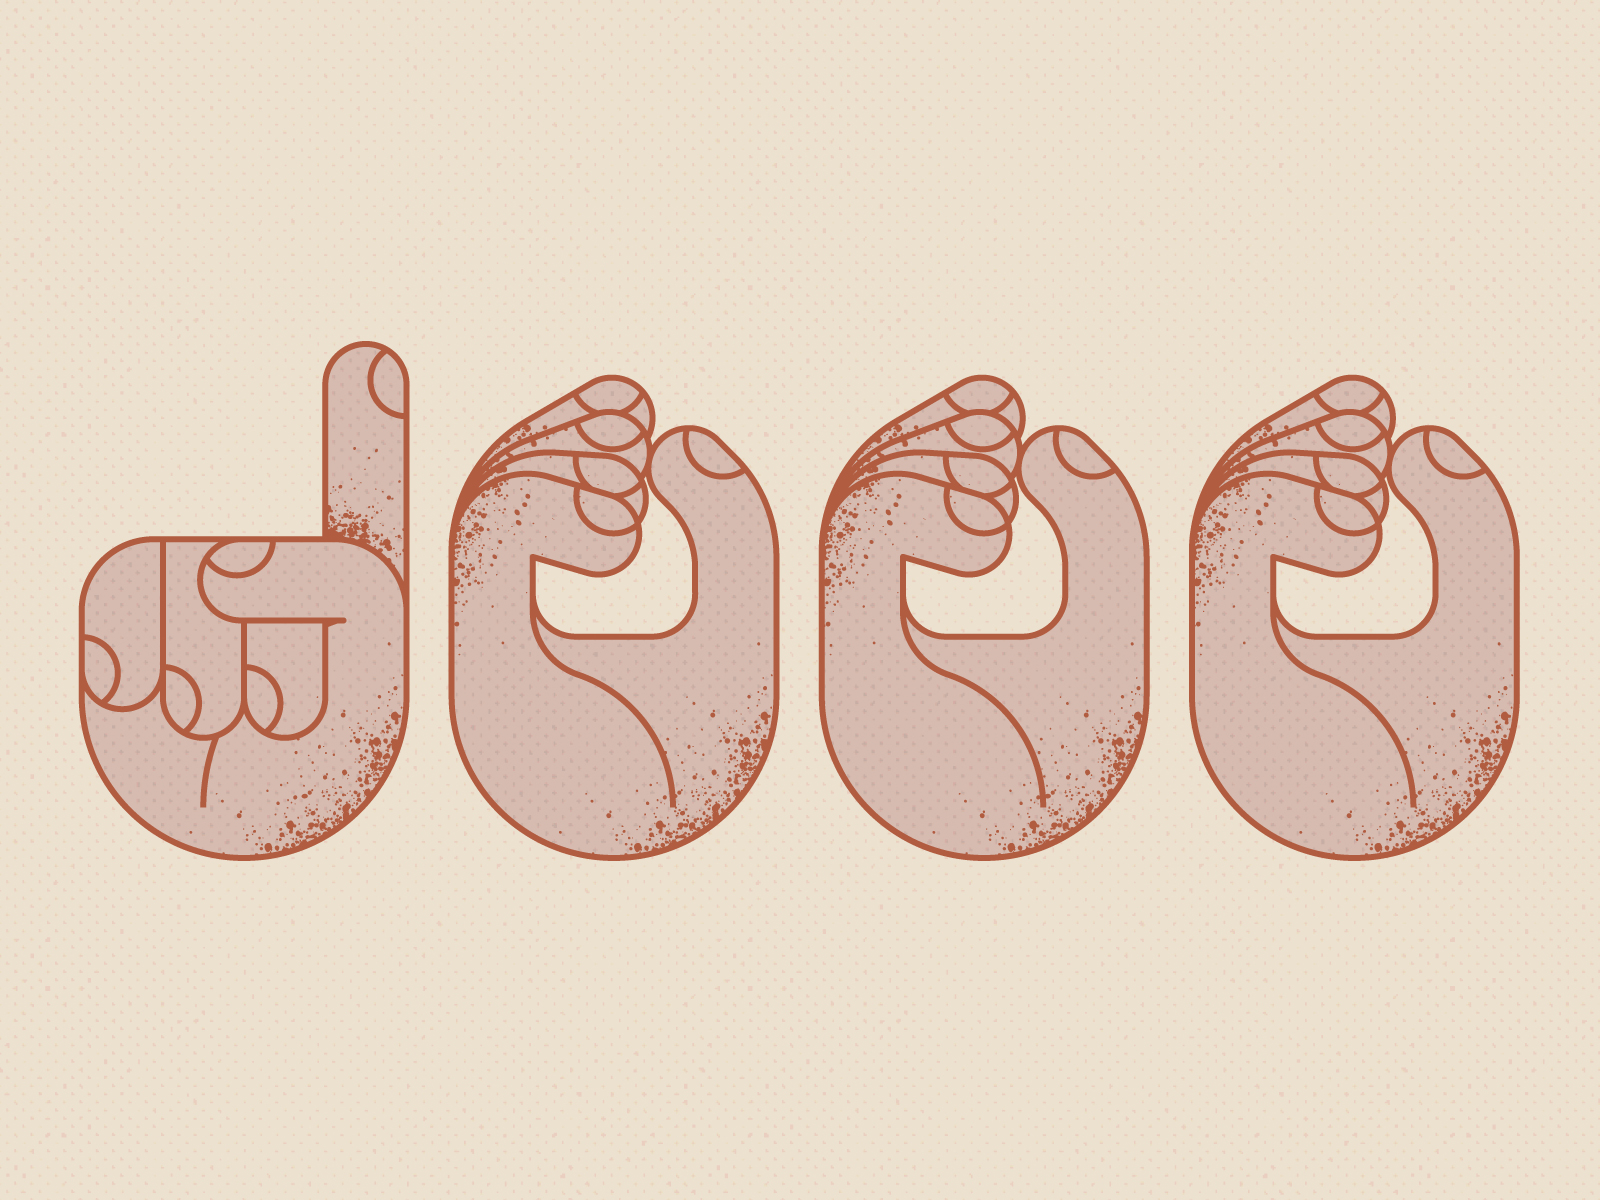 1000 1000 design fingers followers hands illustration stylized support vector